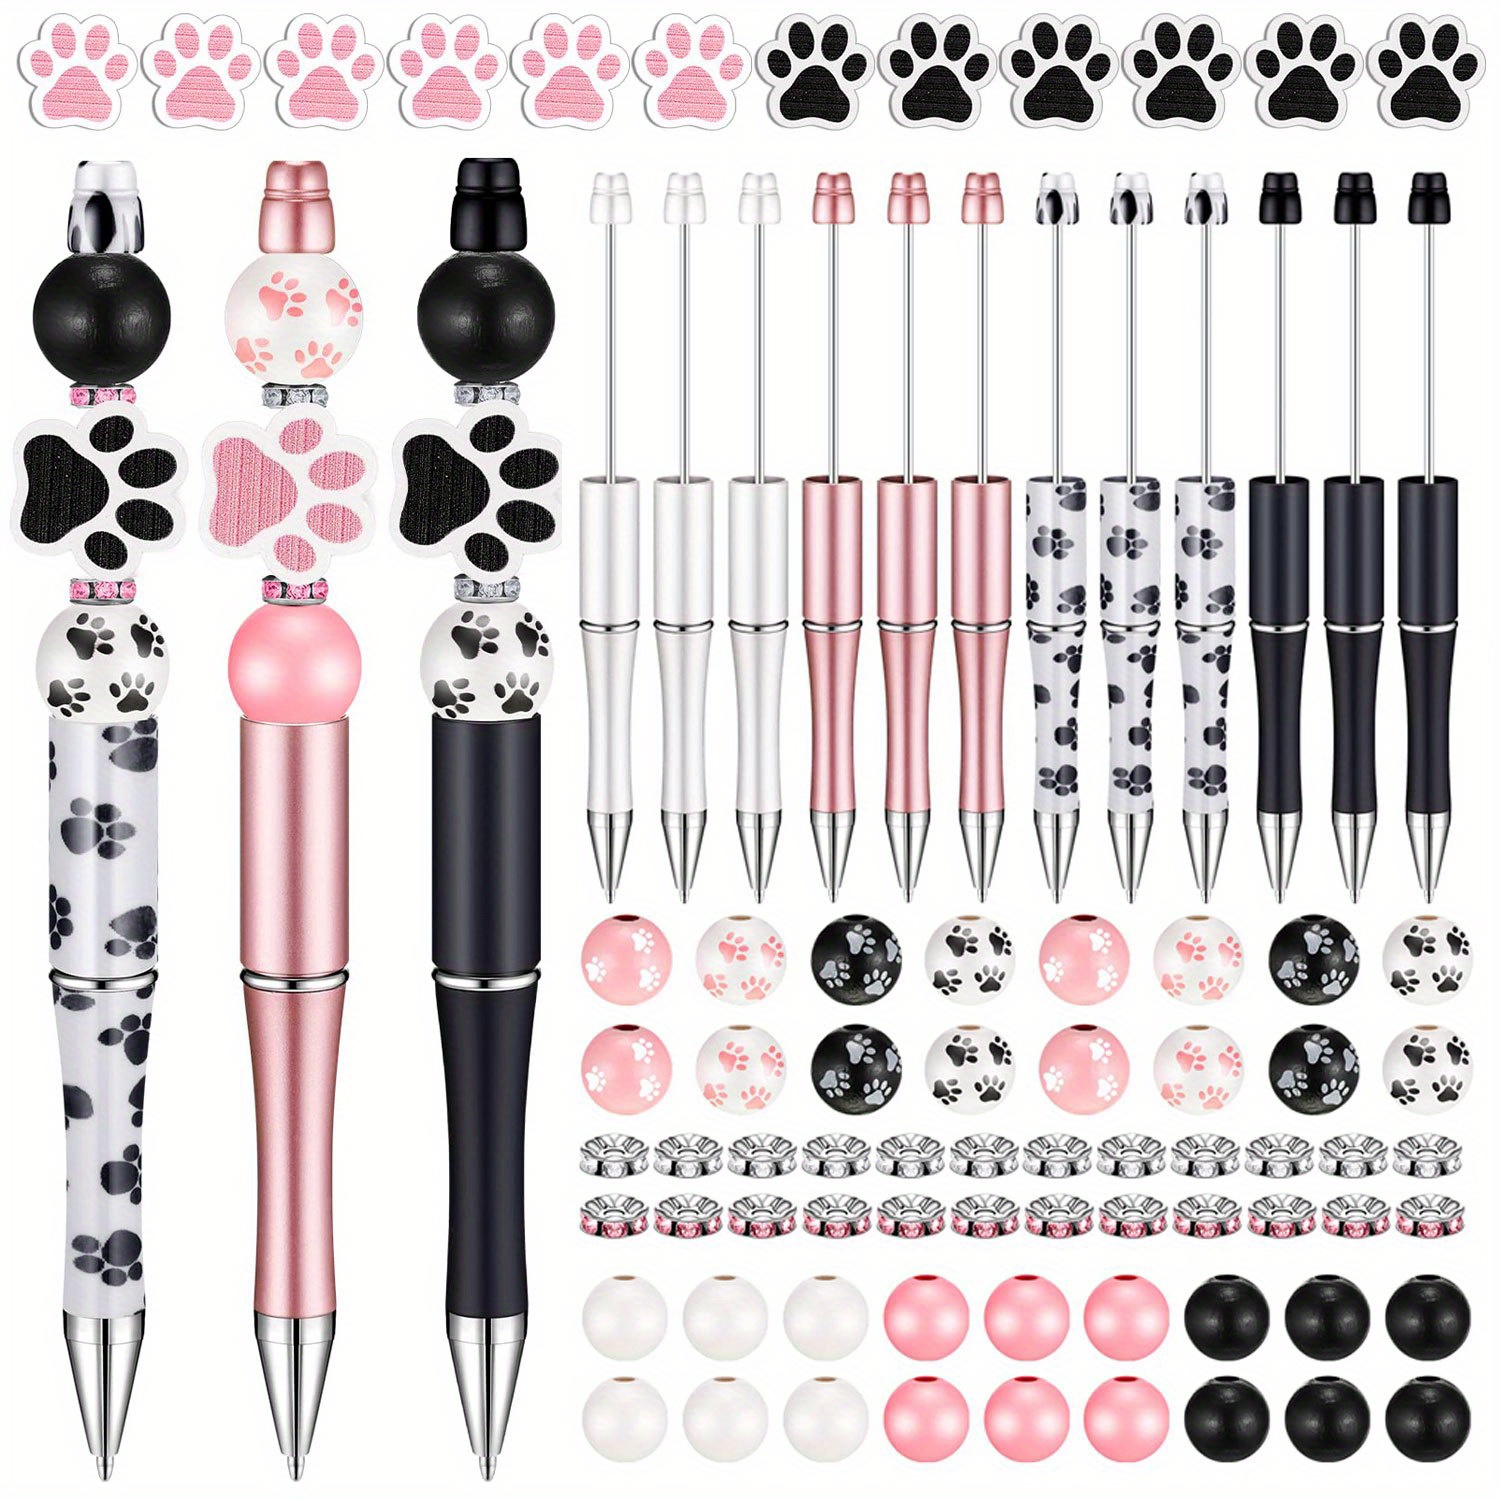 

Cute Dog Paw Pen Charm Set 82pcs - Plastic Diy Beadable Pen Accessories With Pendants, Beads & Pens For Crafting, Refillable Black Ink Ballpoint Writing Instruments